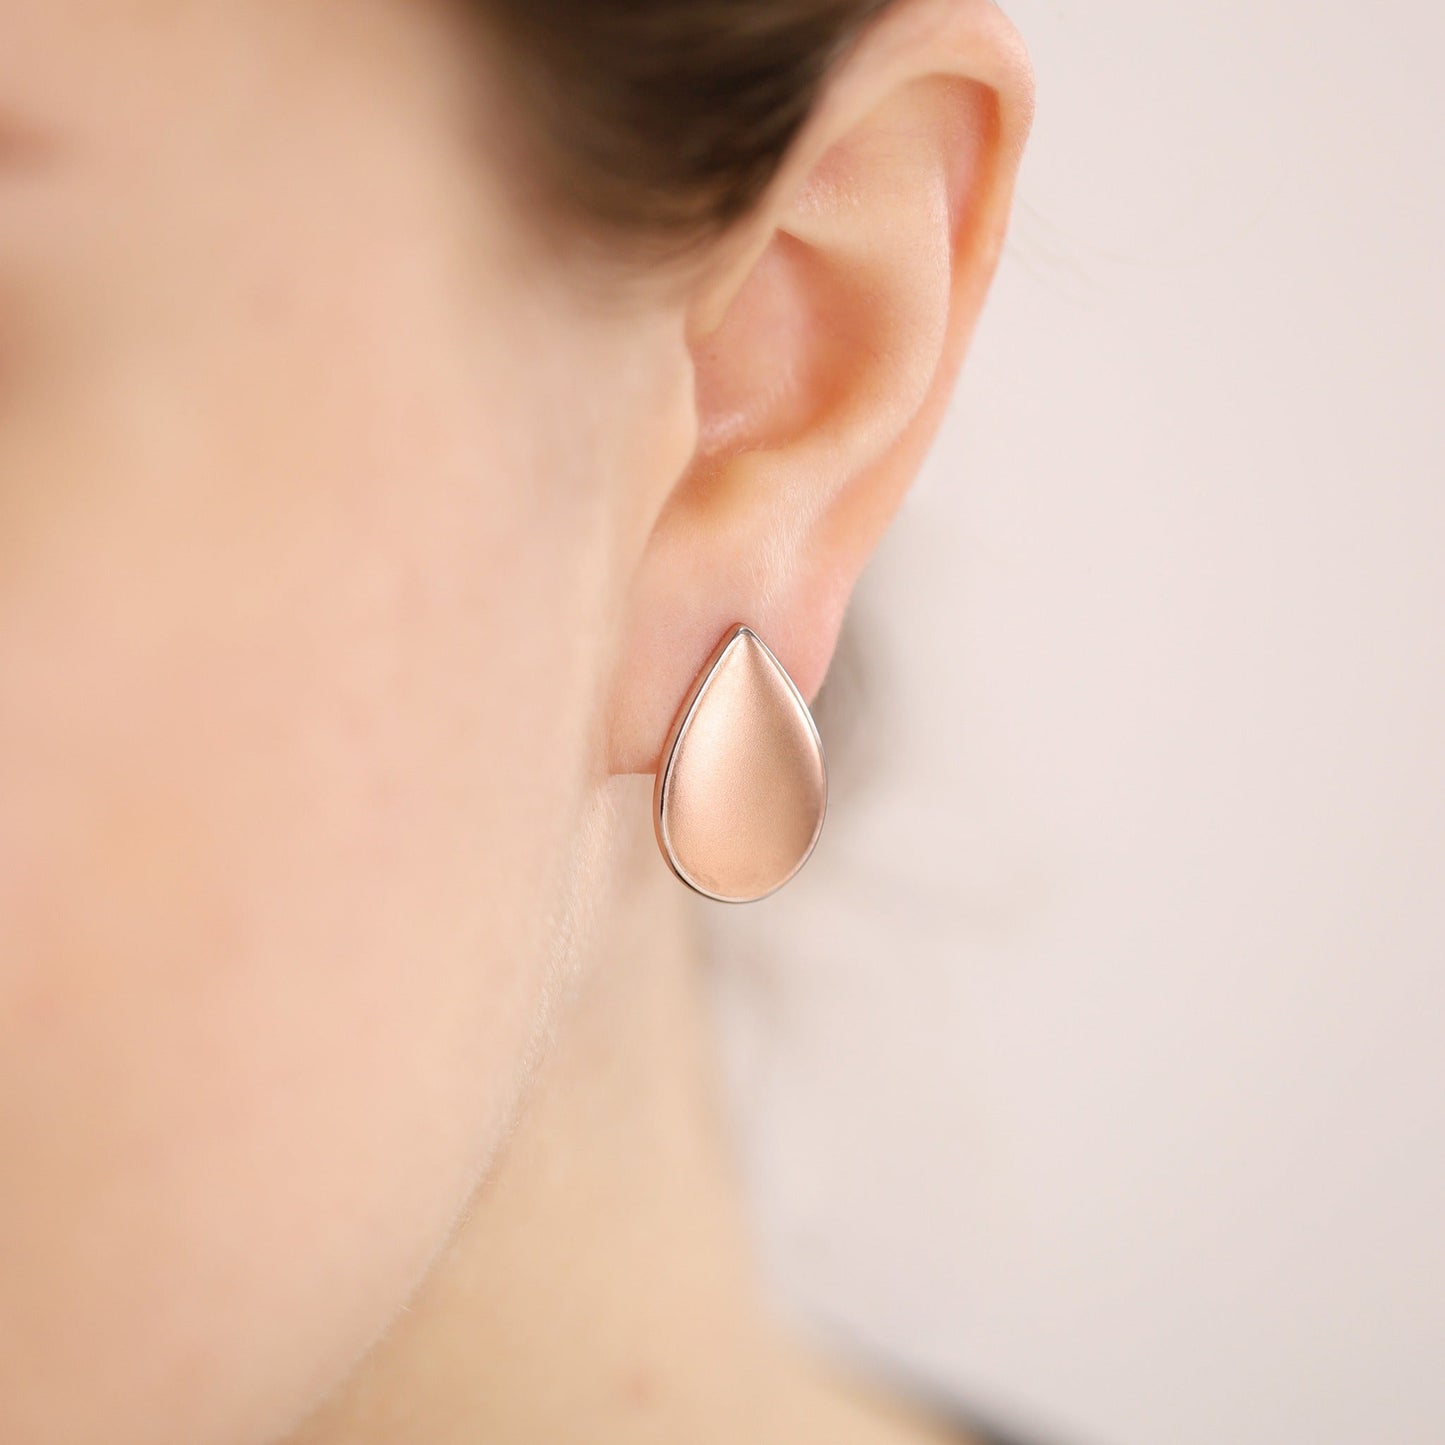 18ct 1 Micron Drop Rose gold plated earrings PER2005 - FJewellery